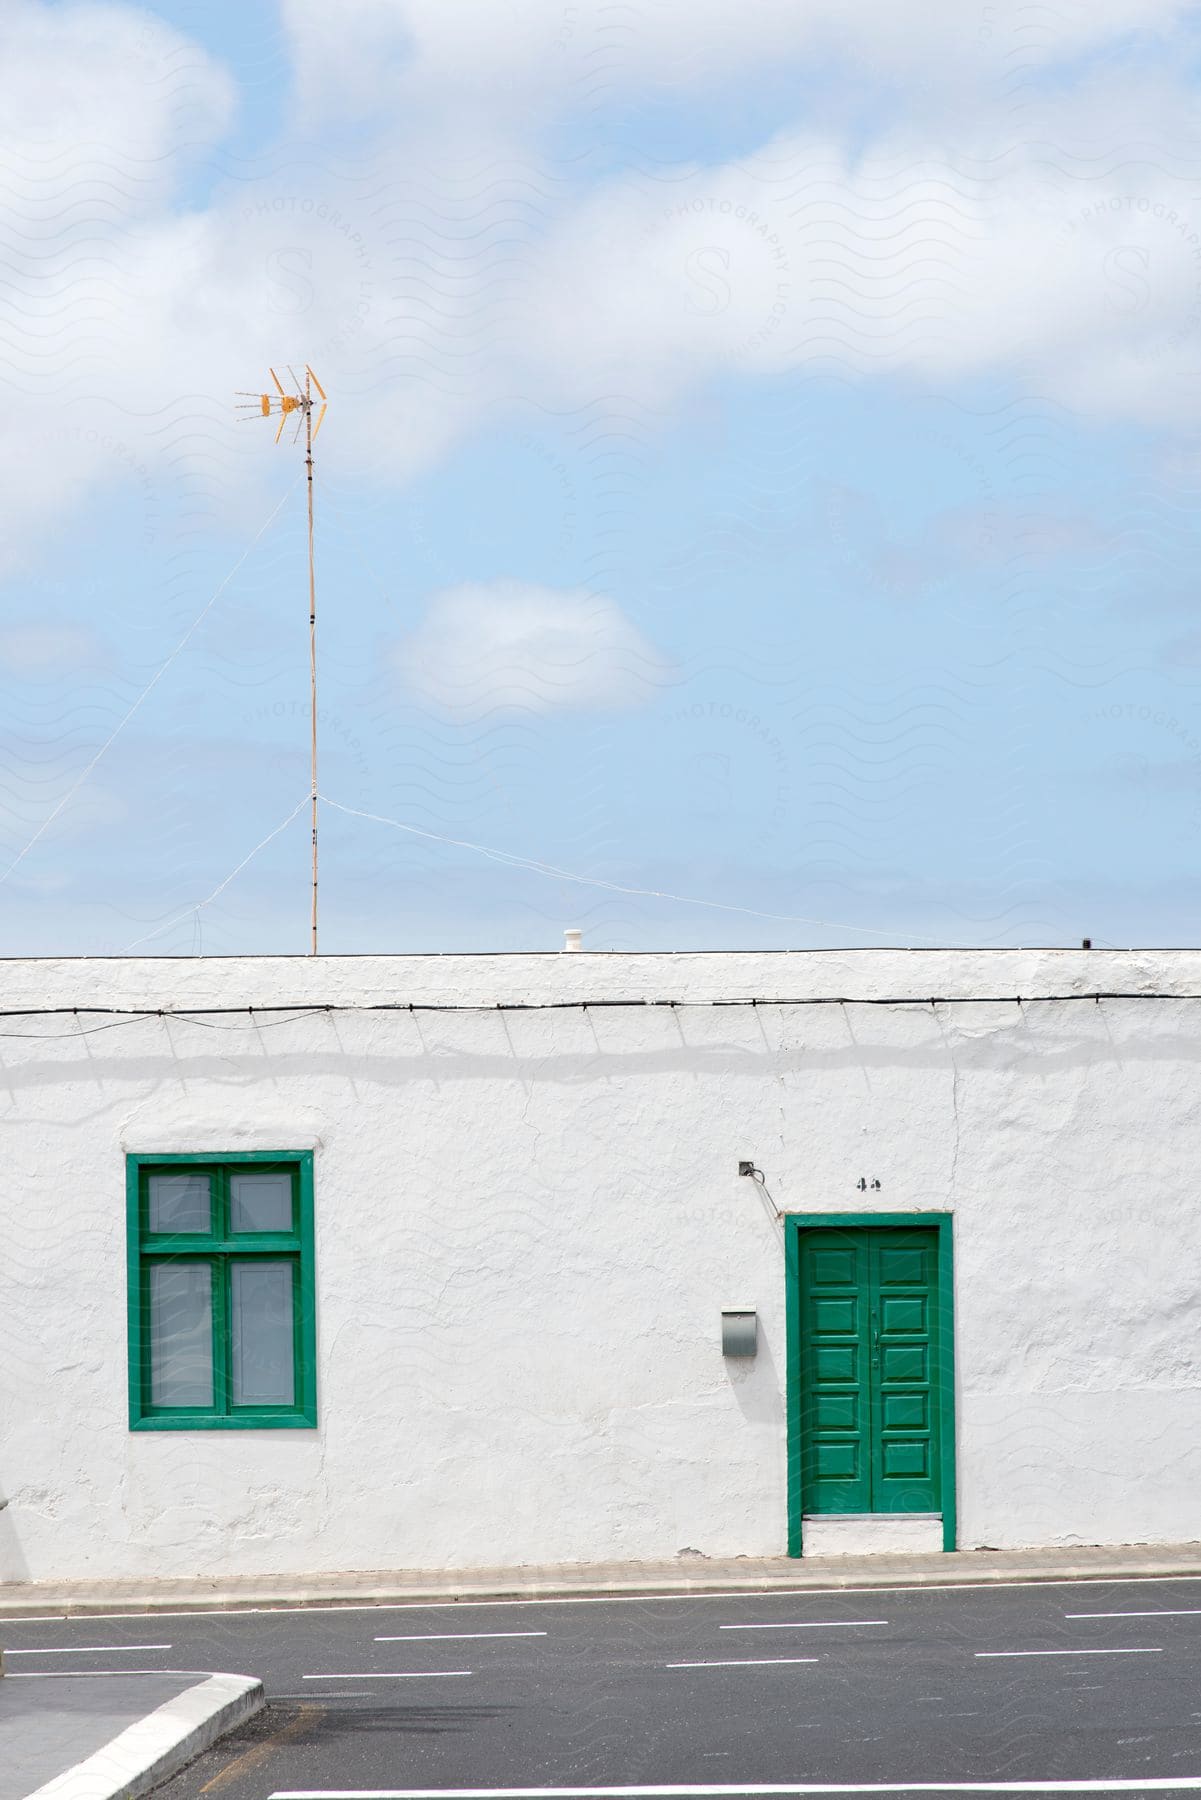 White building with a green door and window, antenna on the roof, under a blue sky with clouds